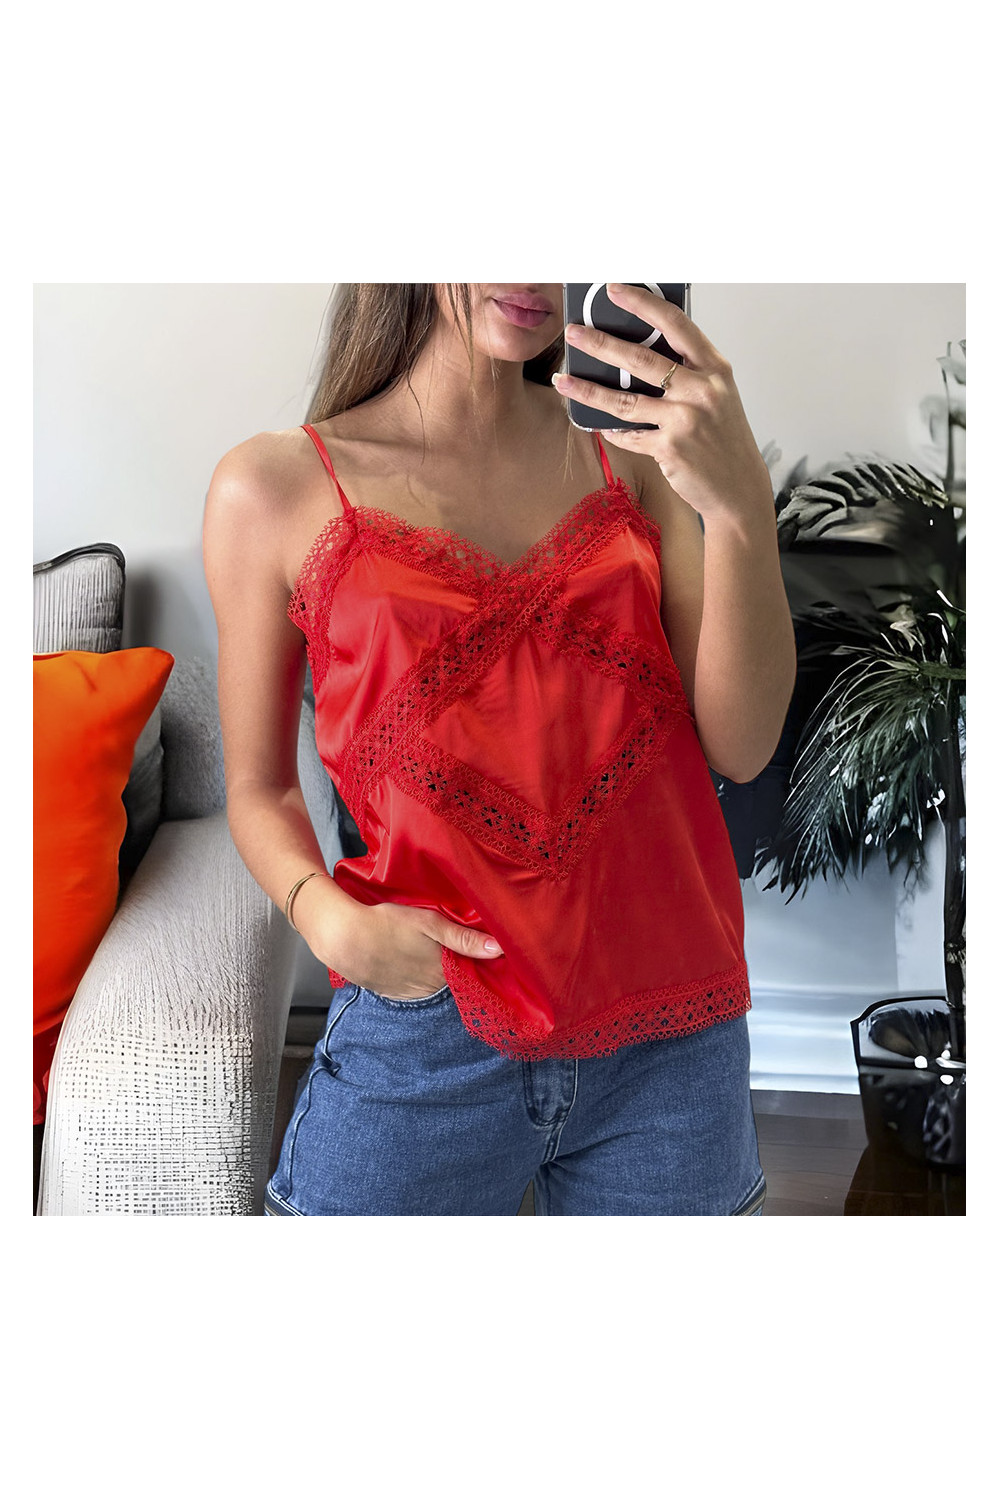 Red satin tank top with women's fashion